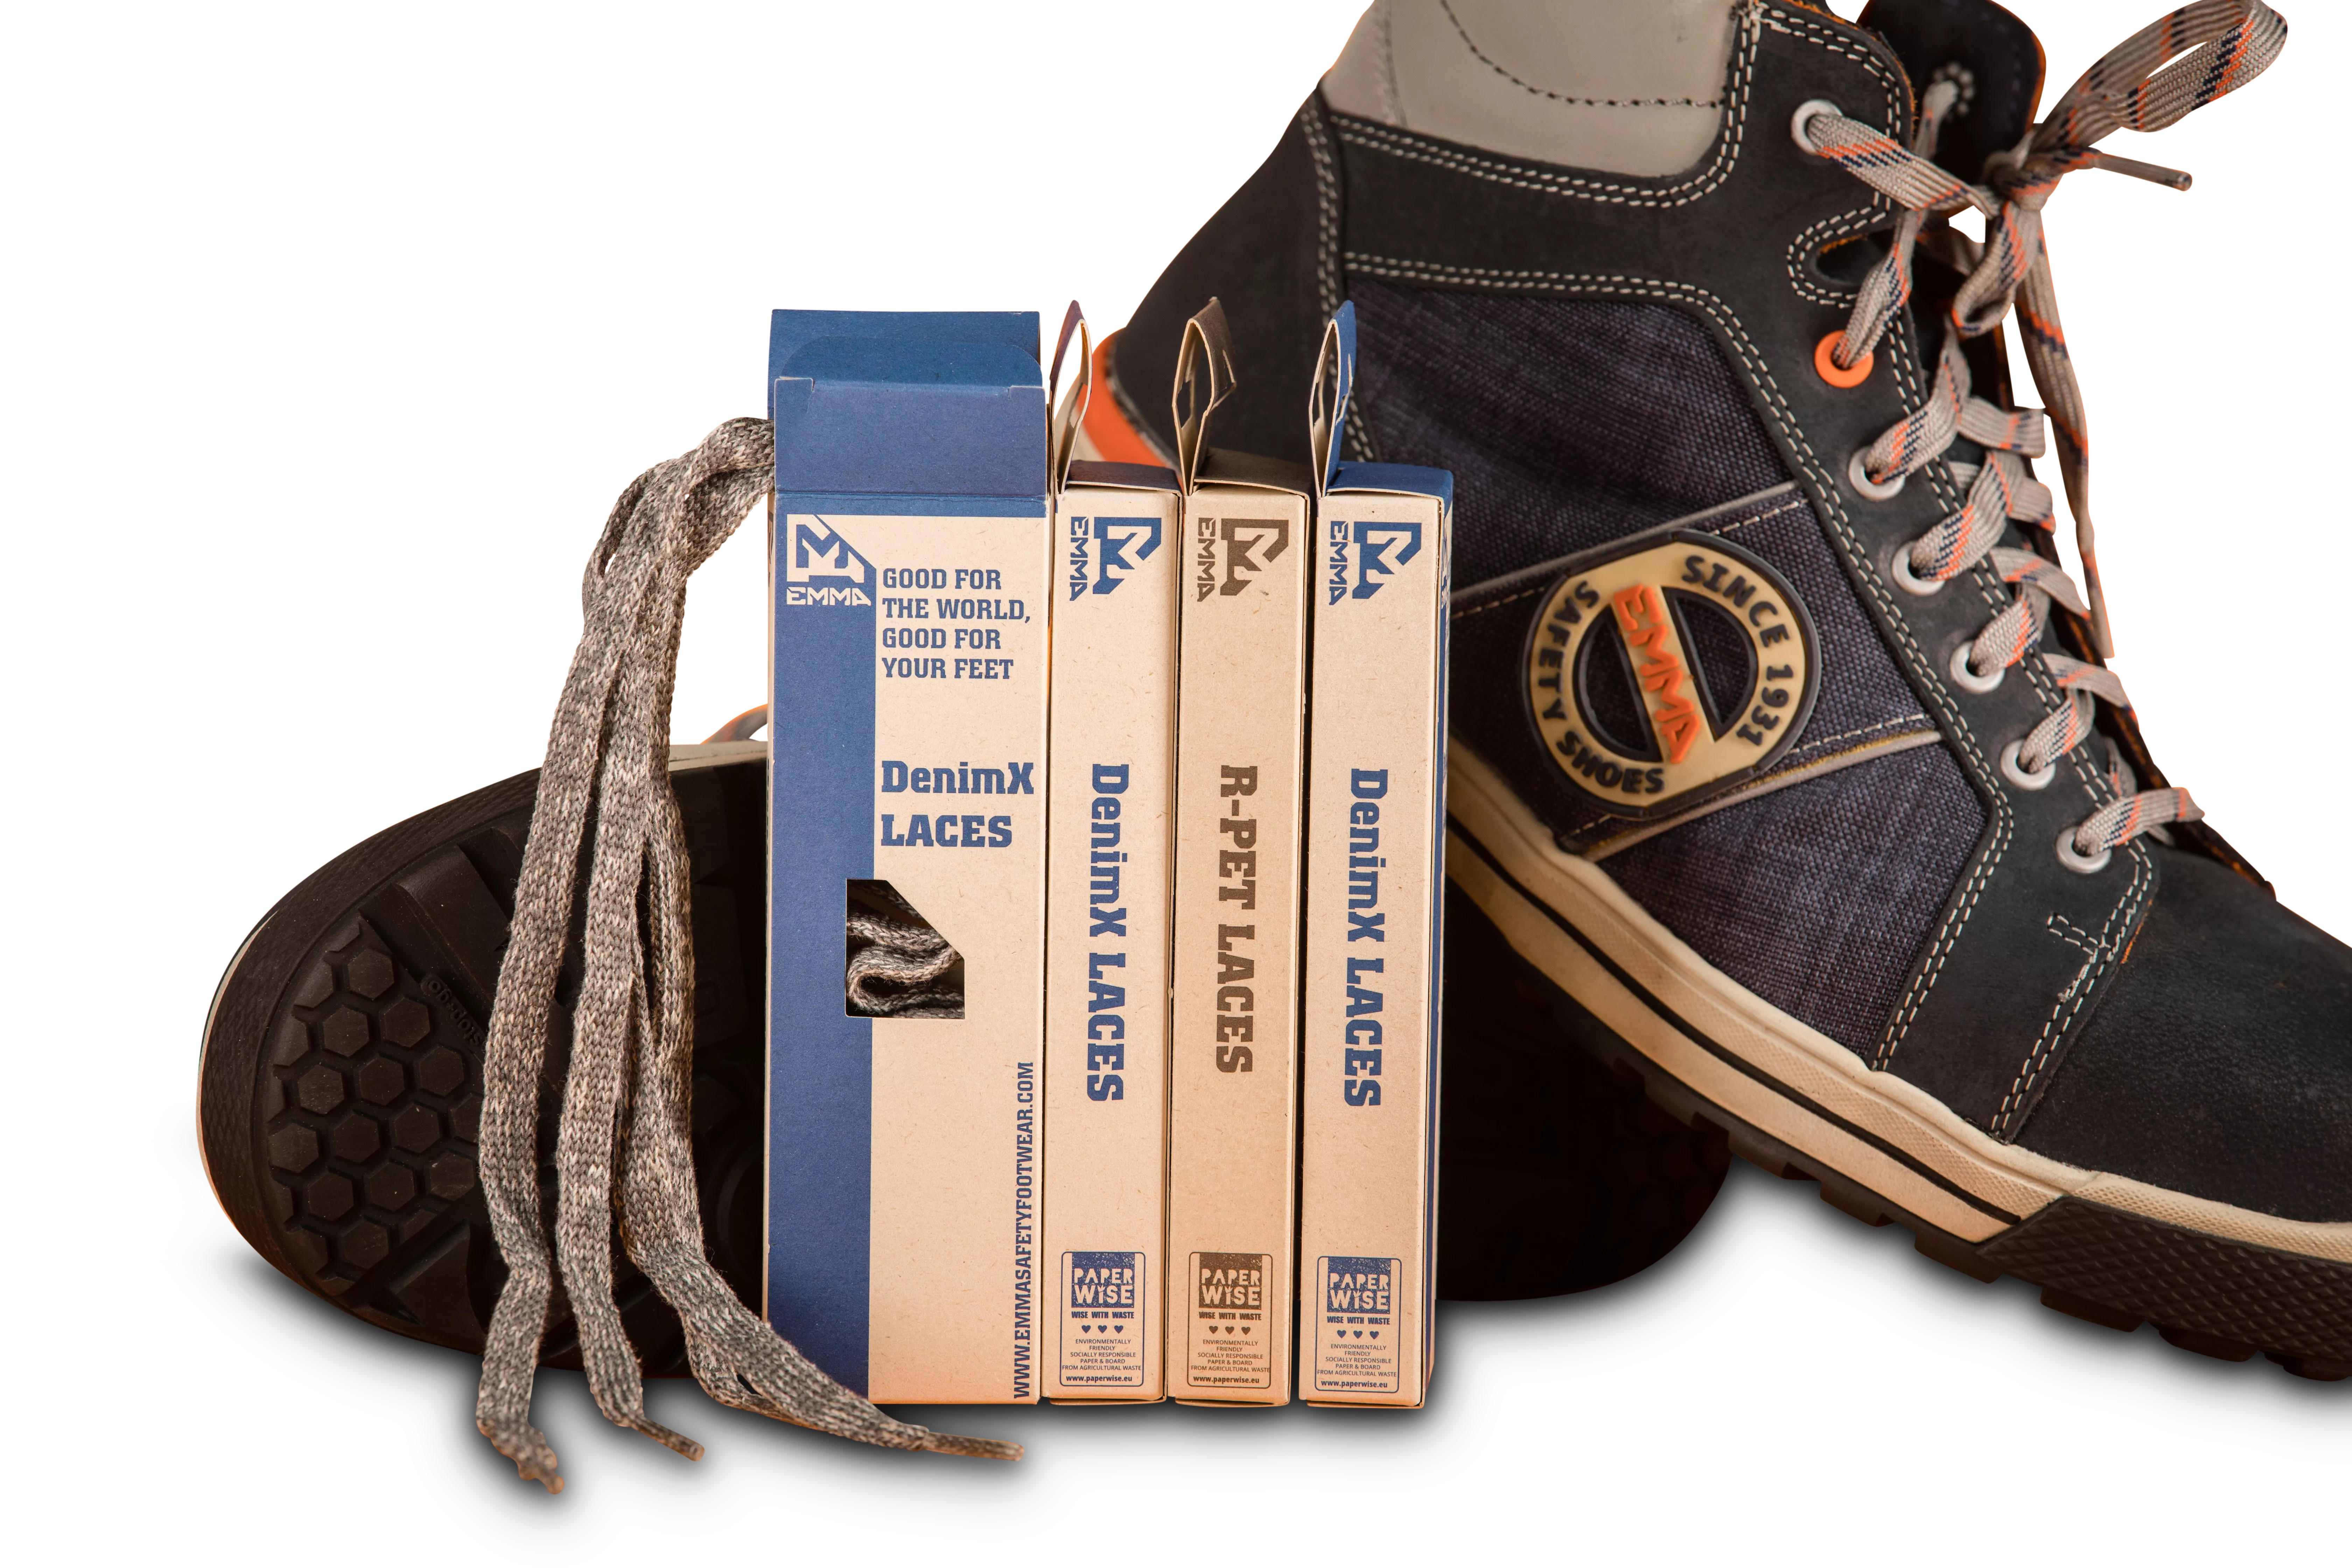 PaperWise eco paper board waste sustainable packaging laces safetyshoes Emma Emmashoes c